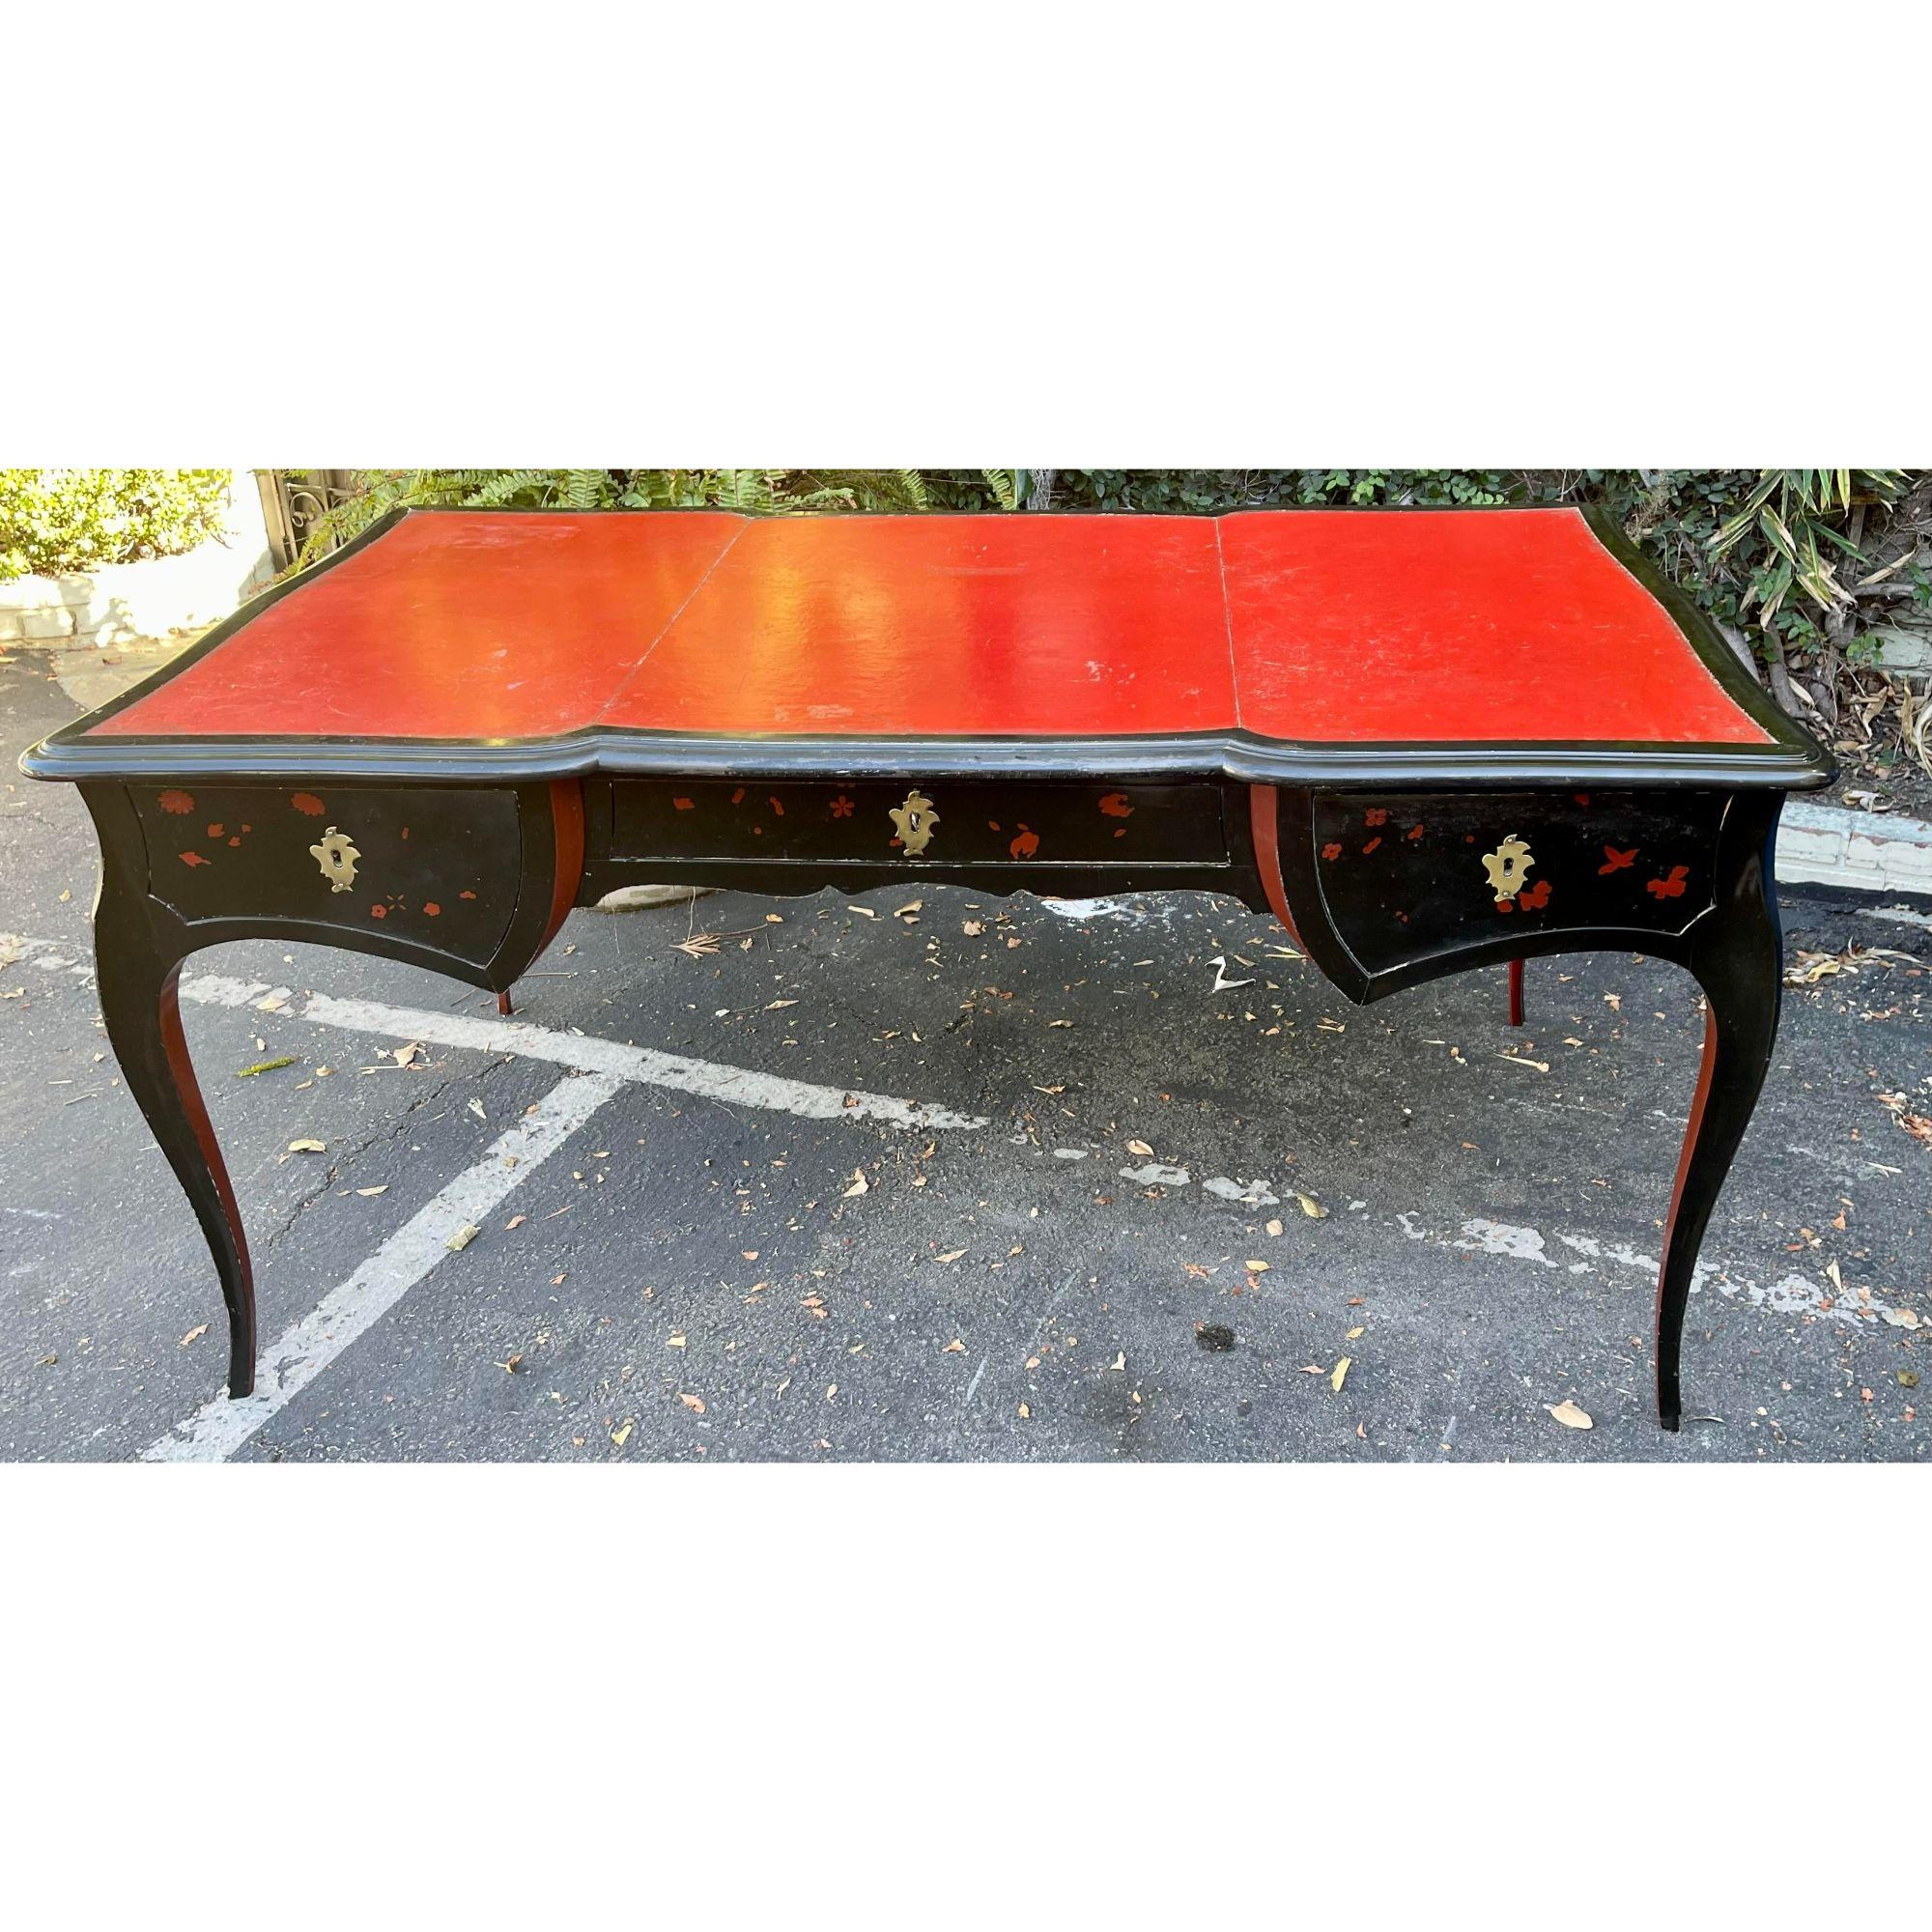 Antique Chinoiserie Black Lacquer Red Leather Bureau Plat Writing Table Desk In Good Condition For Sale In LOS ANGELES, CA